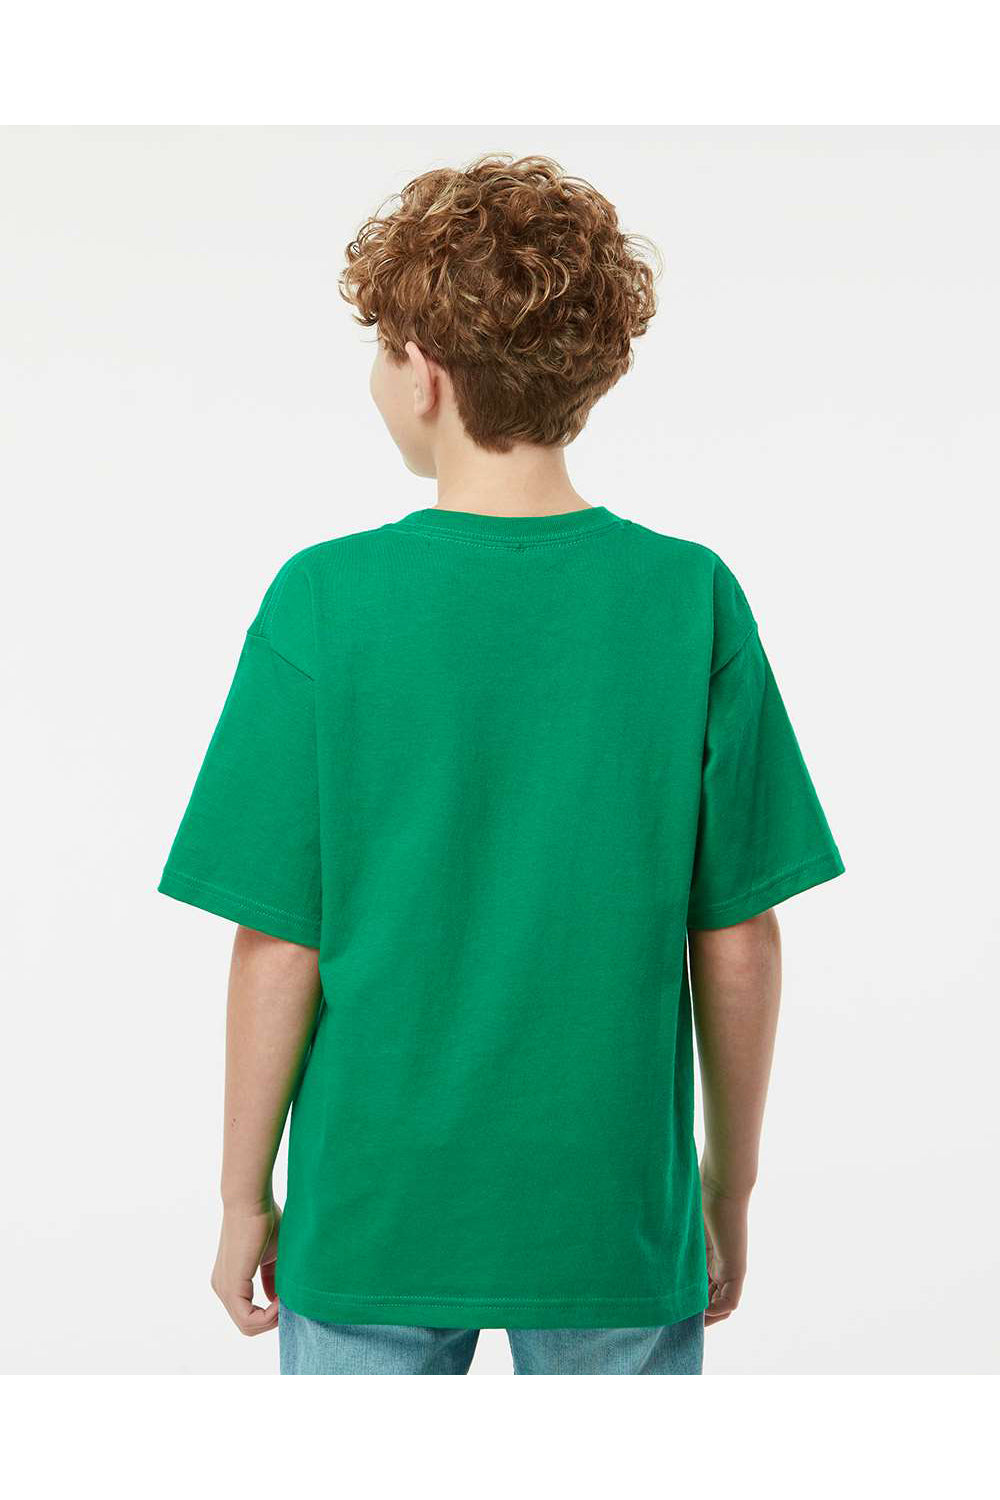 M&O 4850 Youth Gold Soft Touch Short Sleeve Crewneck T-Shirt Fine Kelly Green Model Back